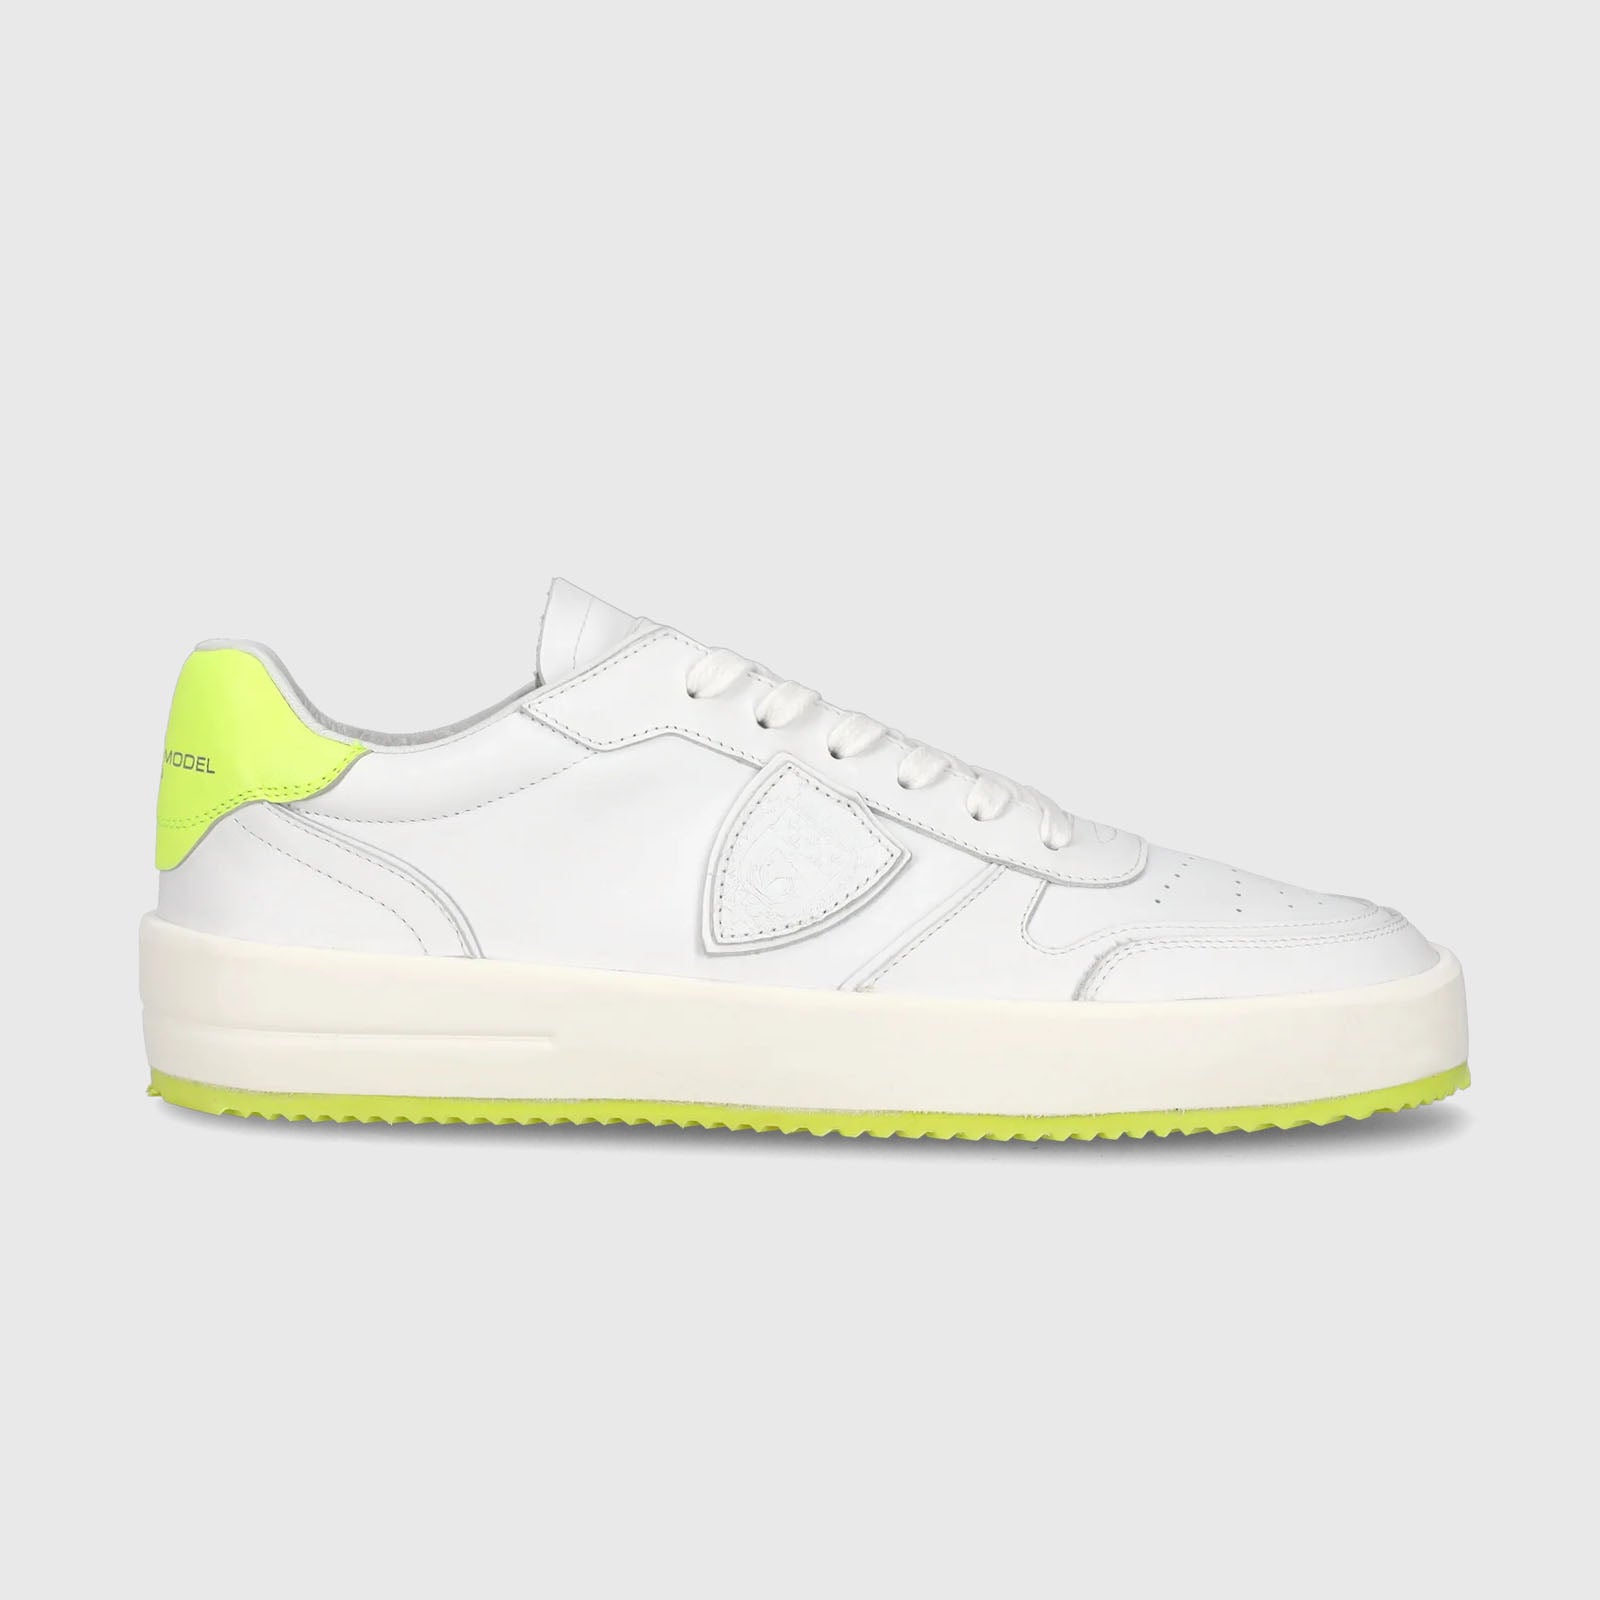 Philippe Model Sneaker Nice Veau Leather White/Yellow Fluo - 6